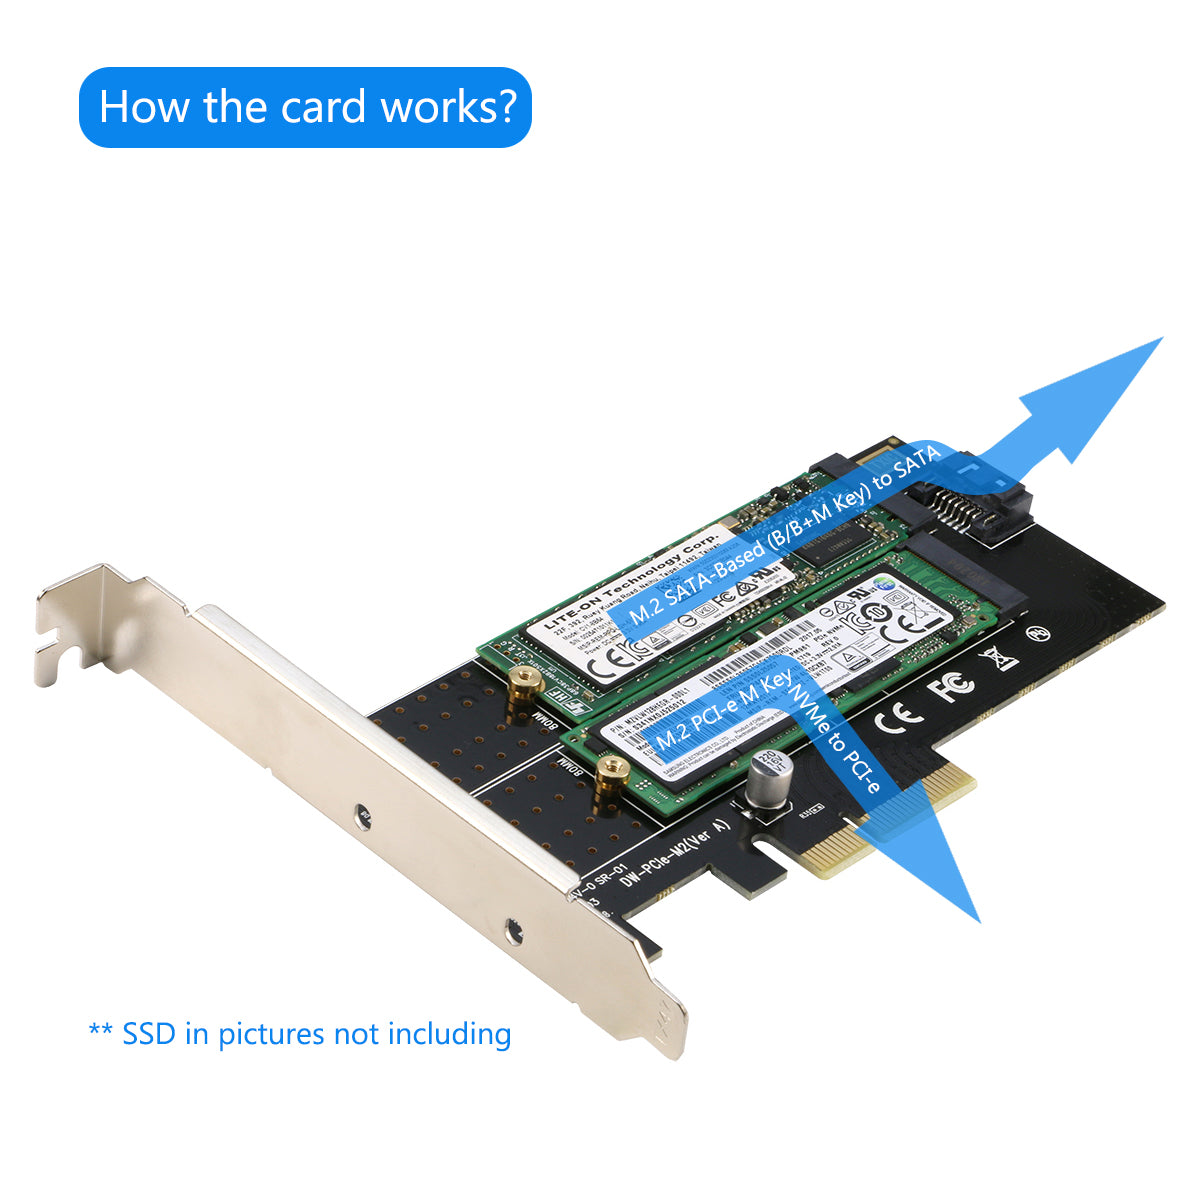 RIITOP RIITOP Dual M.2 Adapter M.2 NVMe SSD to PCI-e 3.0 4X + NGFF (B/B+M  Key) SATA-Based SSD to SATA Controller Card with Low Profile Bracket for PC